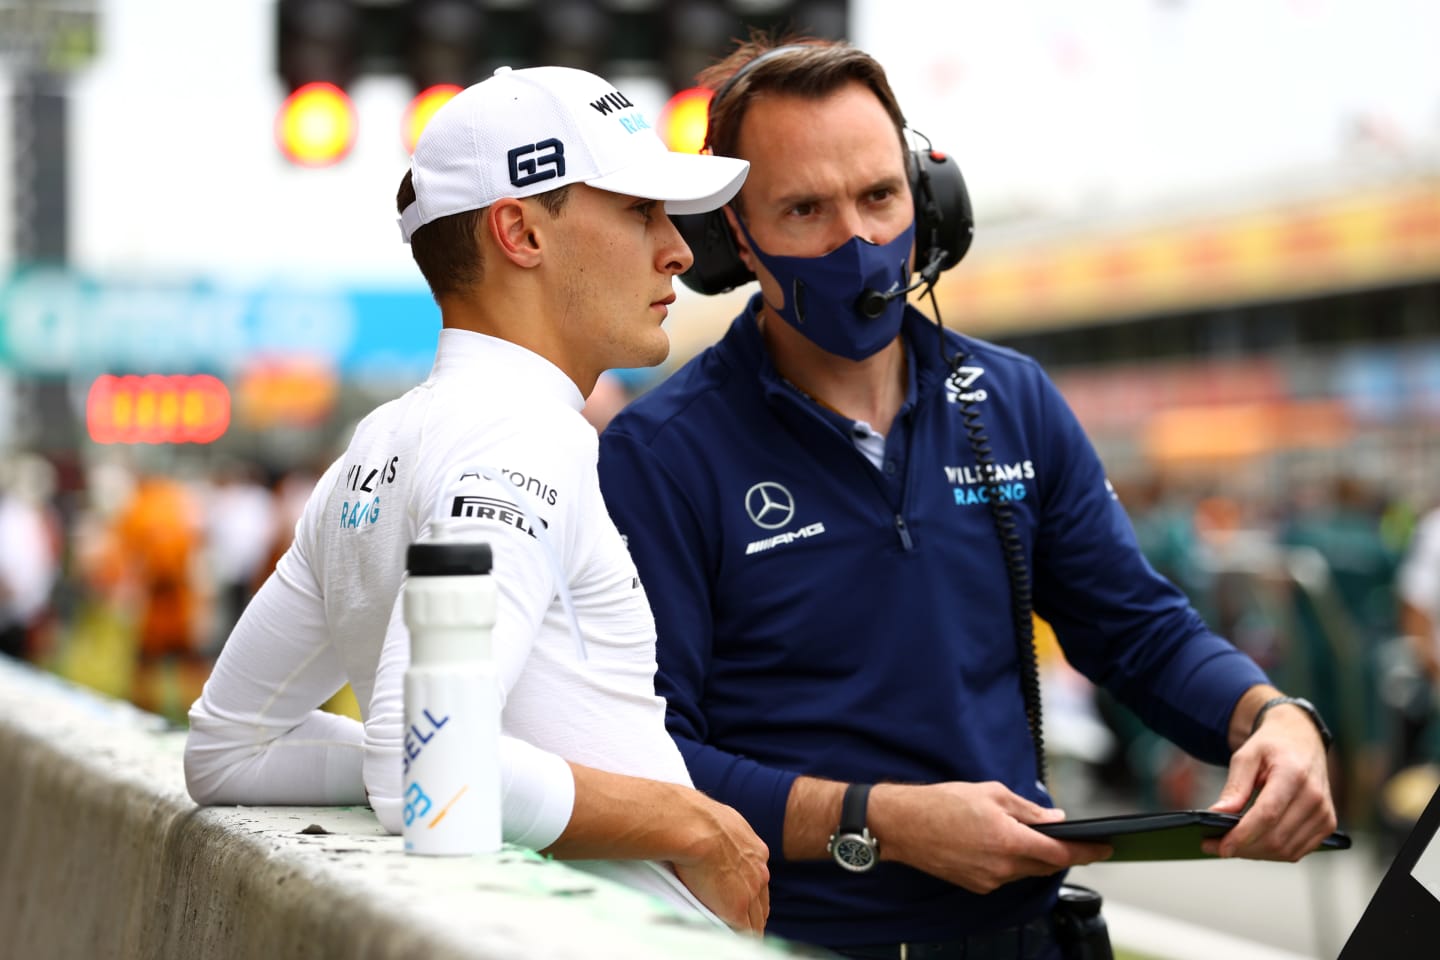 BARCELONA, SPAIN - MAY 09: George Russell of Great Britain and Williams prepares to drive on the grid with a team member prior to the F1 Grand Prix of Spain at Circuit de Barcelona-Catalunya on May 09, 2021 in Barcelona, Spain. (Photo by Bryn Lennon/Getty Images)